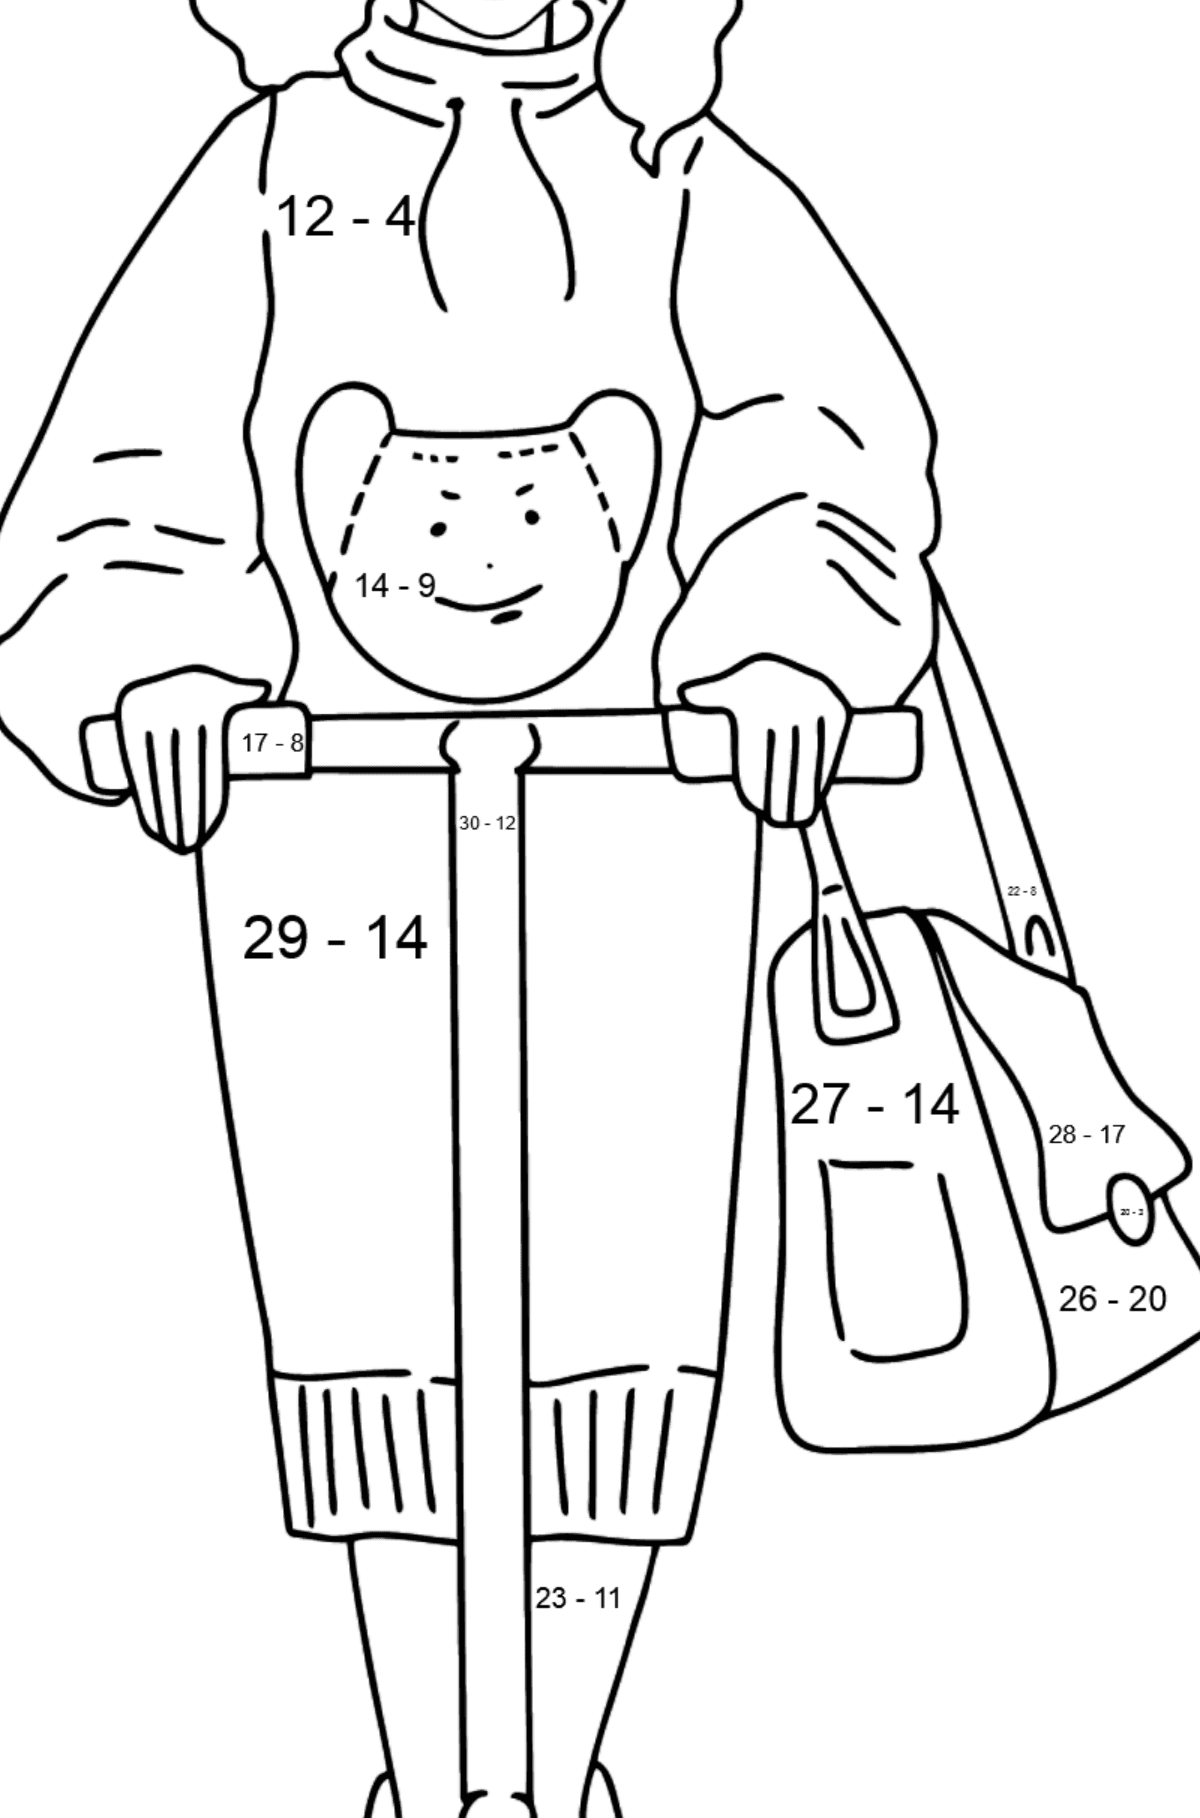 Barbie Doll Riding a Scooter coloring page - Math Coloring - Subtraction for Kids